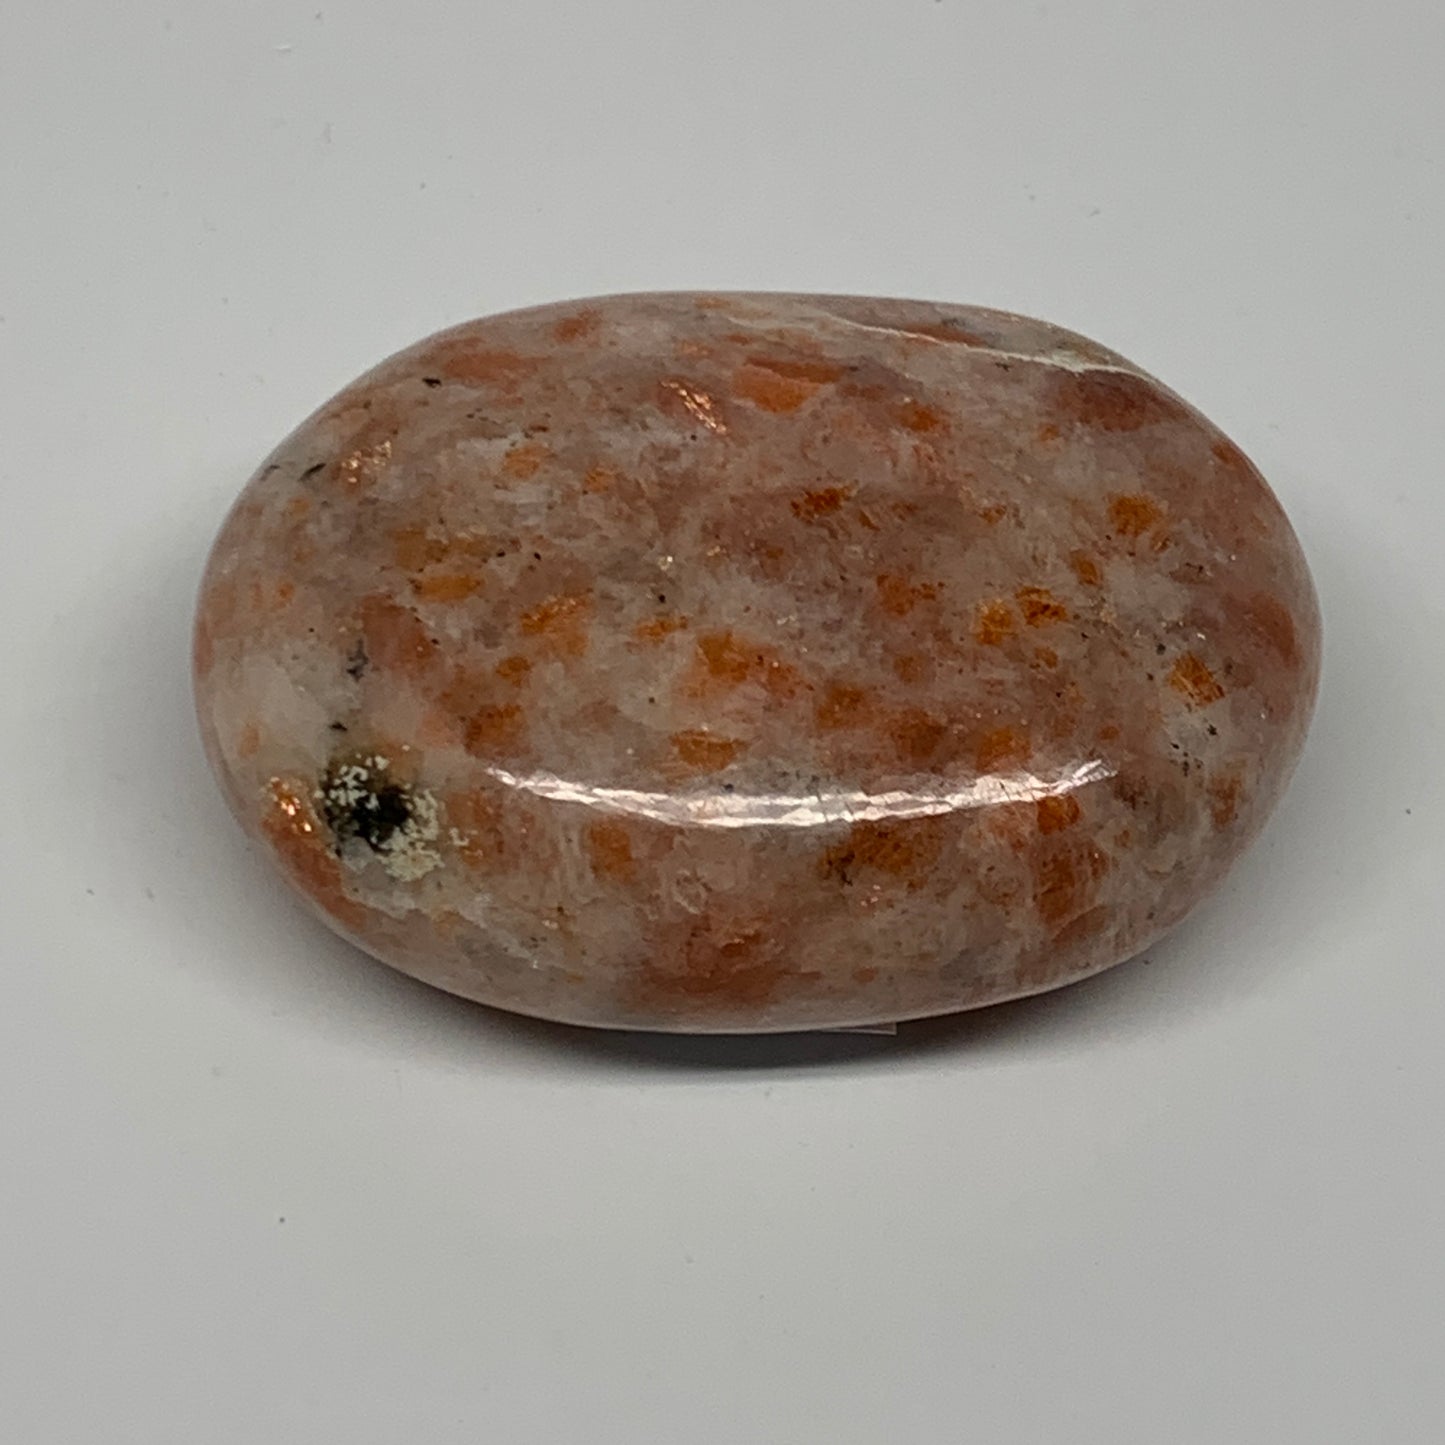 97.6g, 2.4"x1.7"x1", Natural Sunstone Palm-Stone Polished from India, B22015